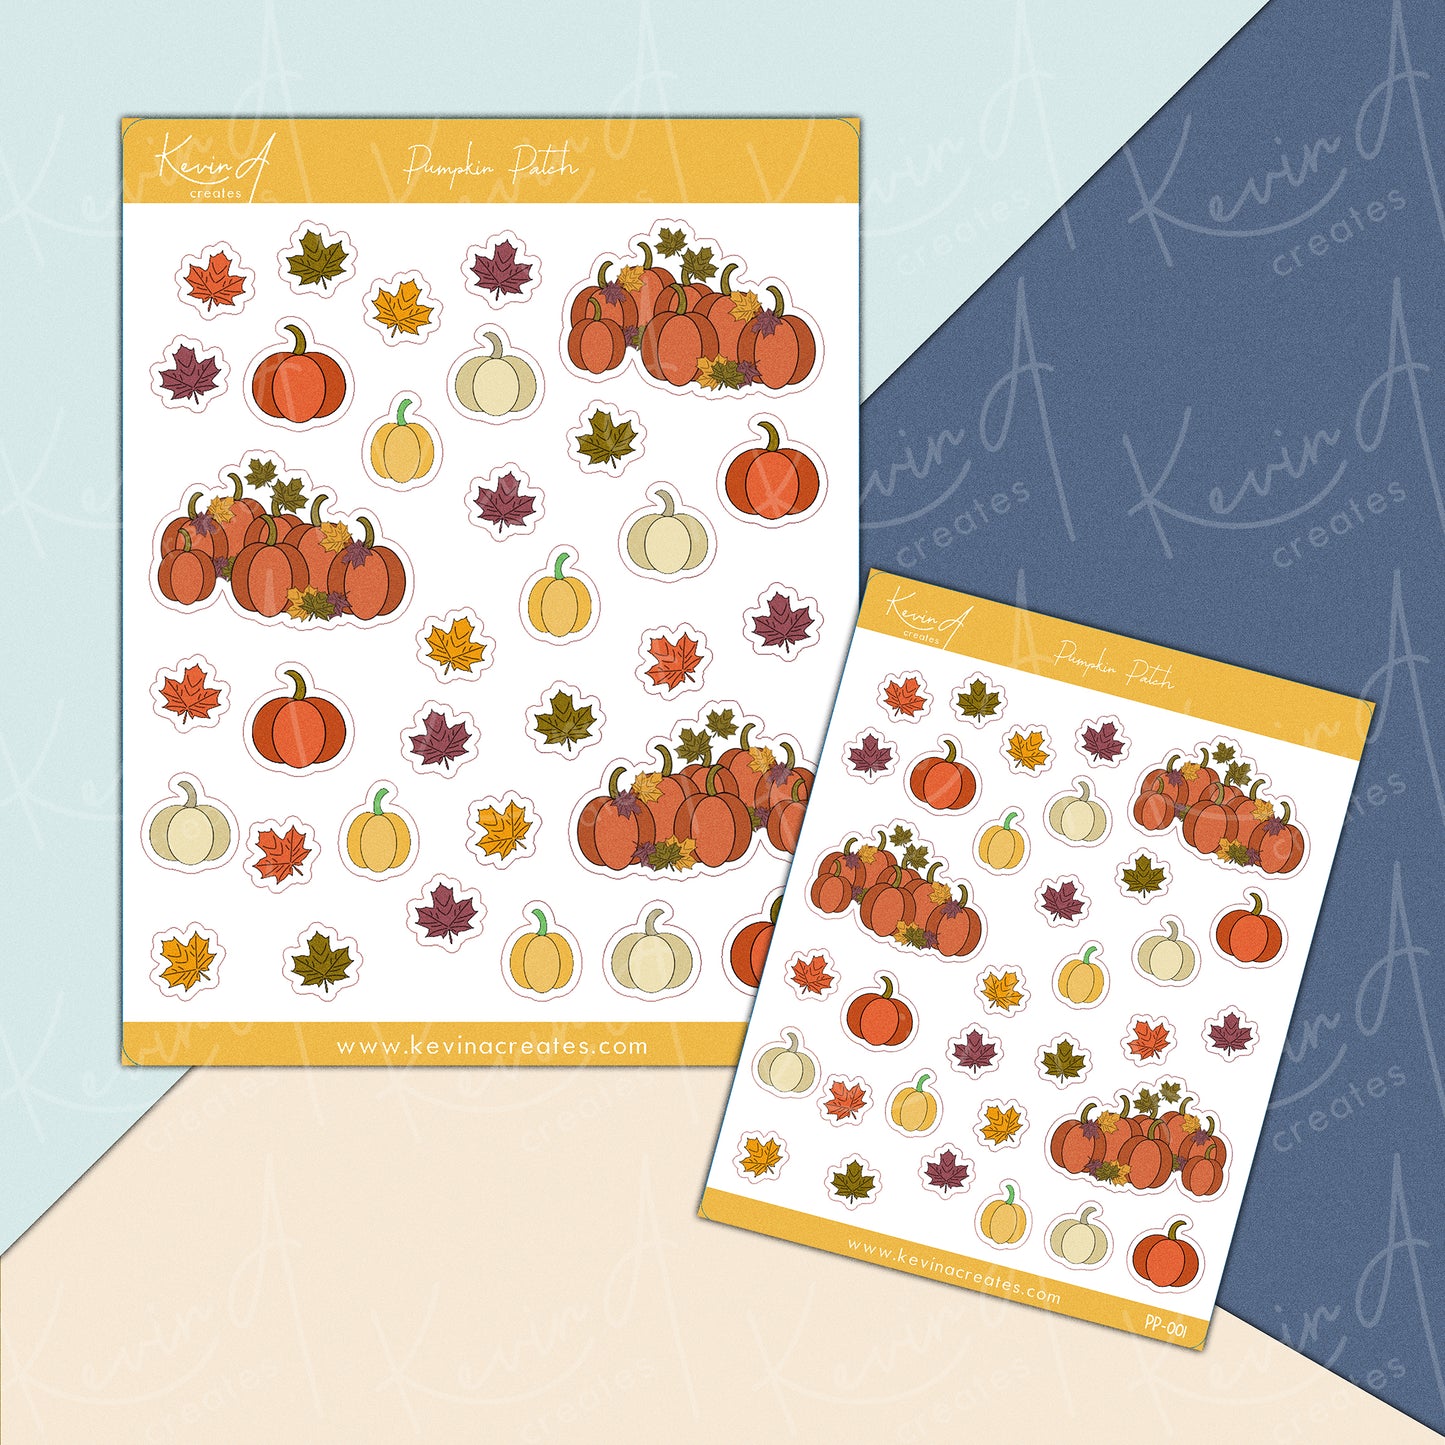 PP-001, Pumpkin Patch Doodle Stickers, Cute Fall Planner Stickers